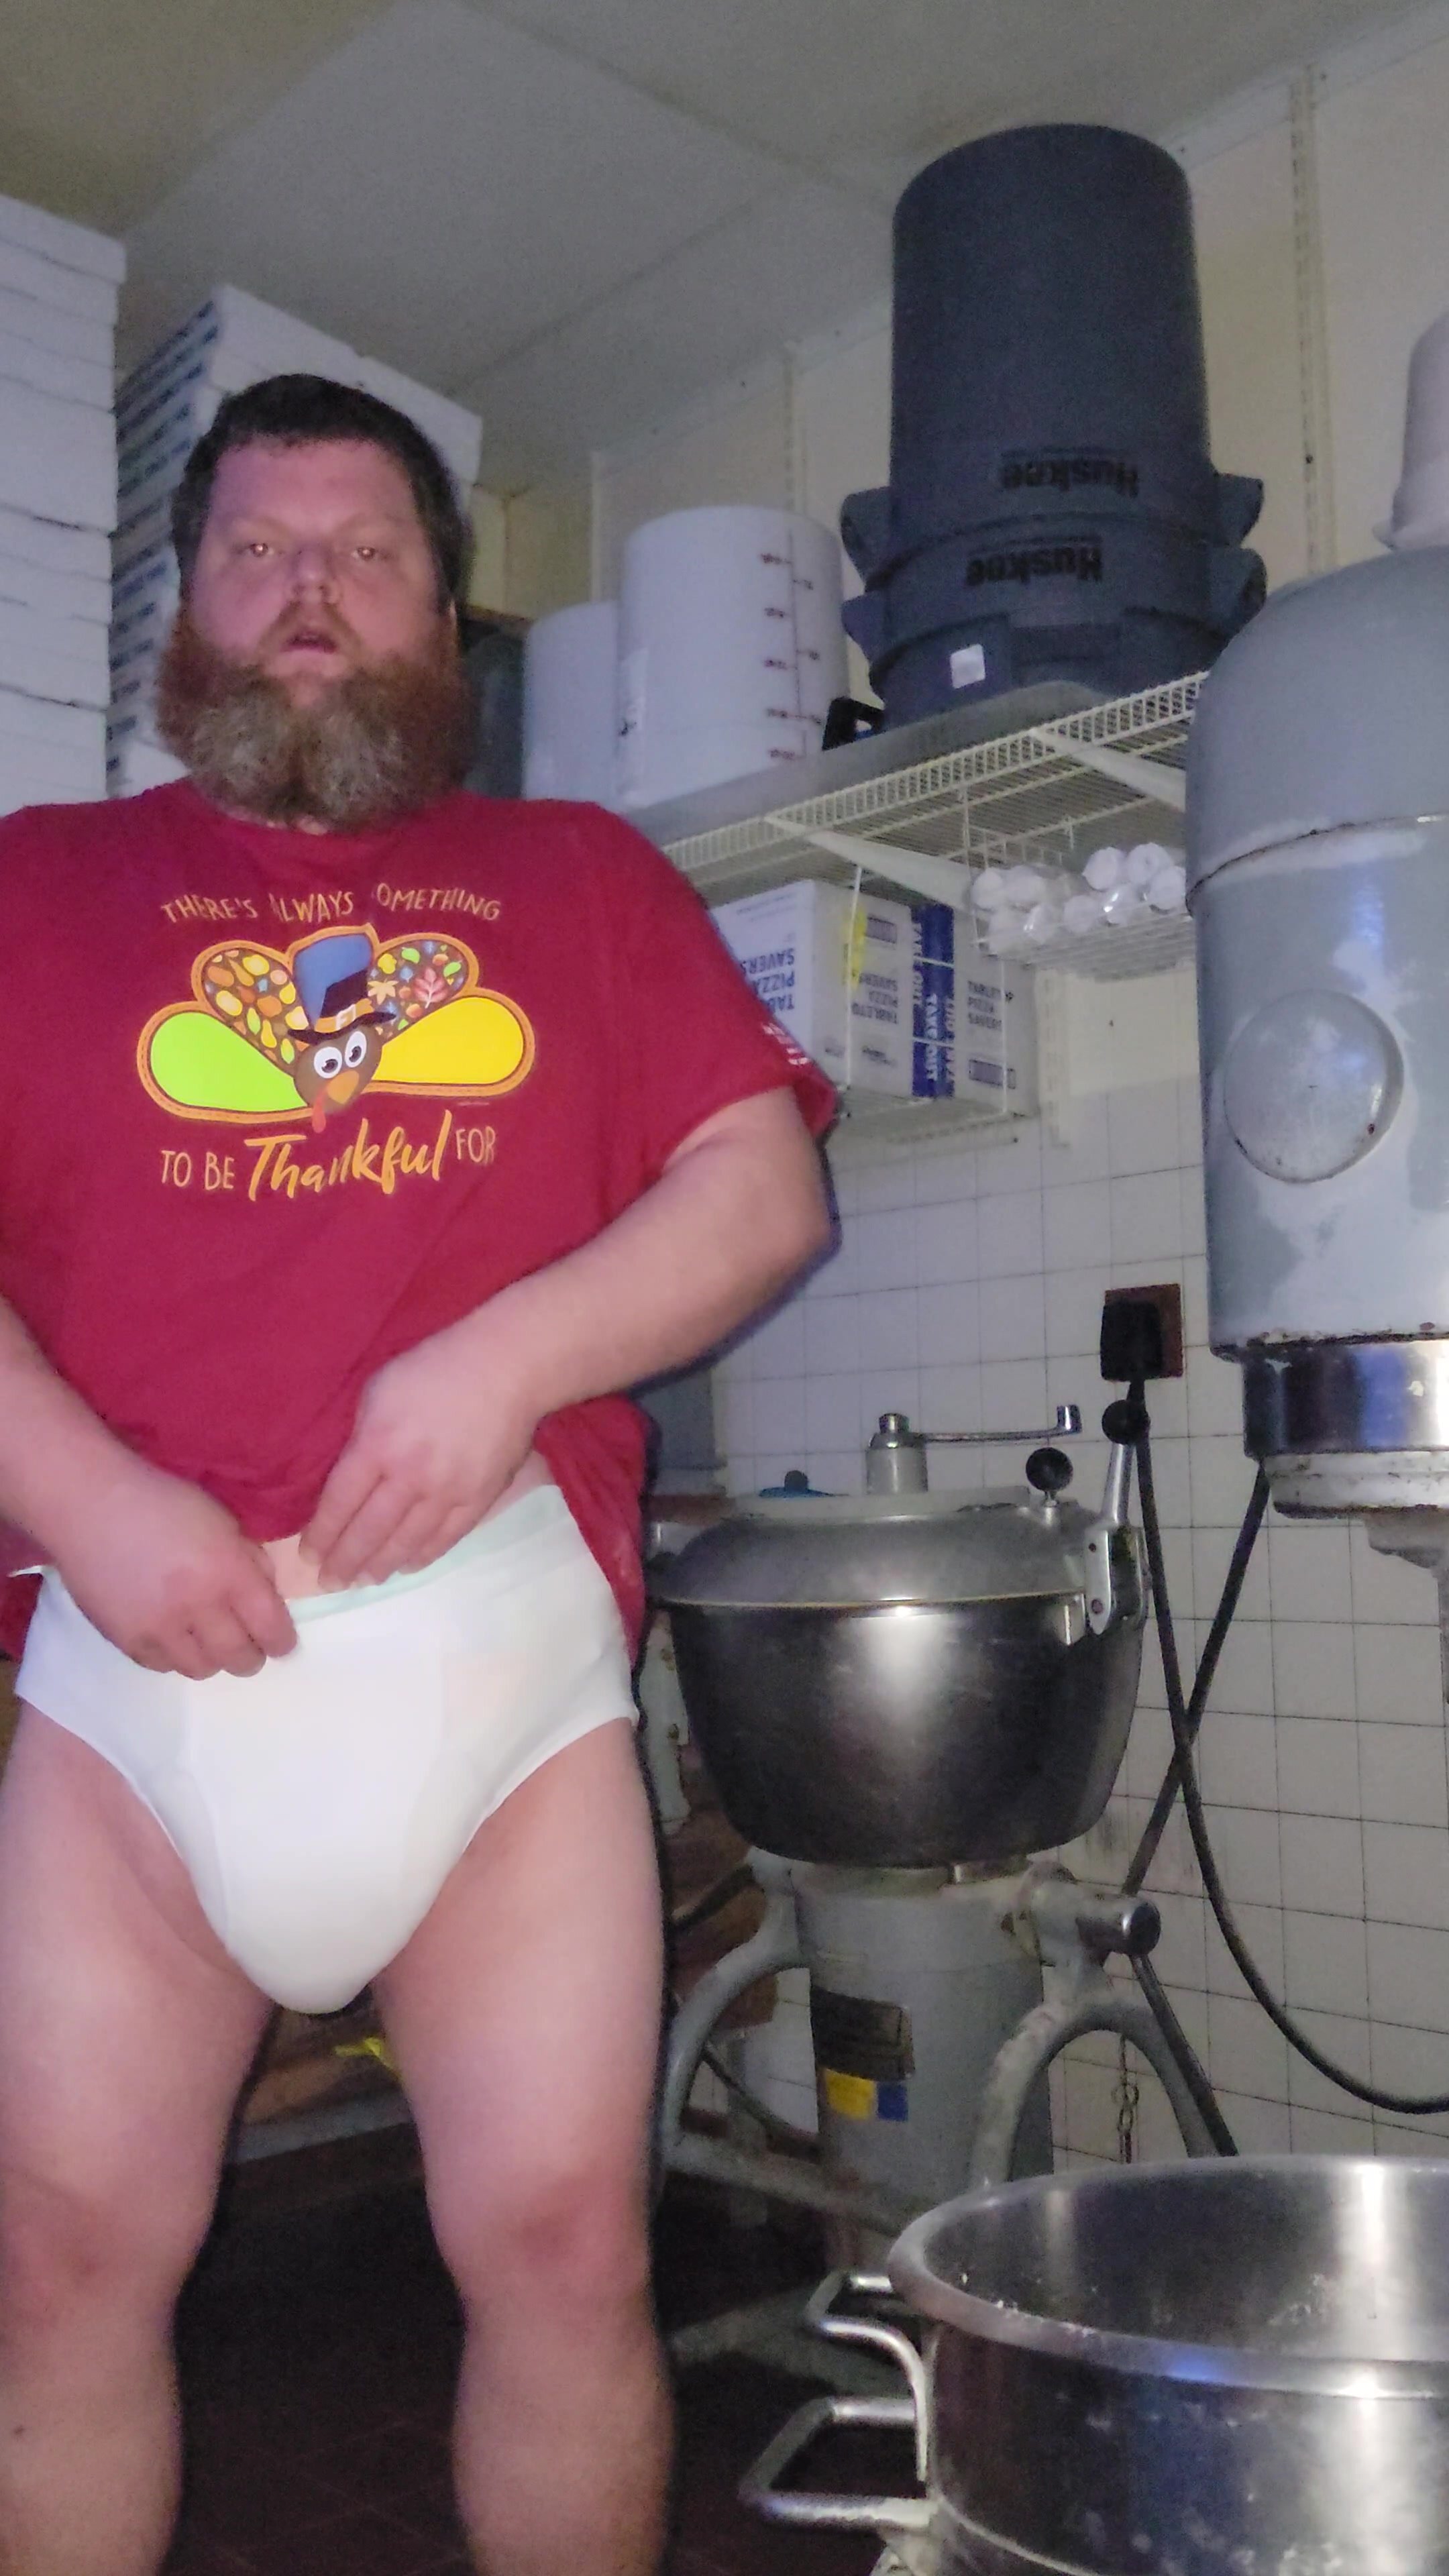 Diaper and briefs at work